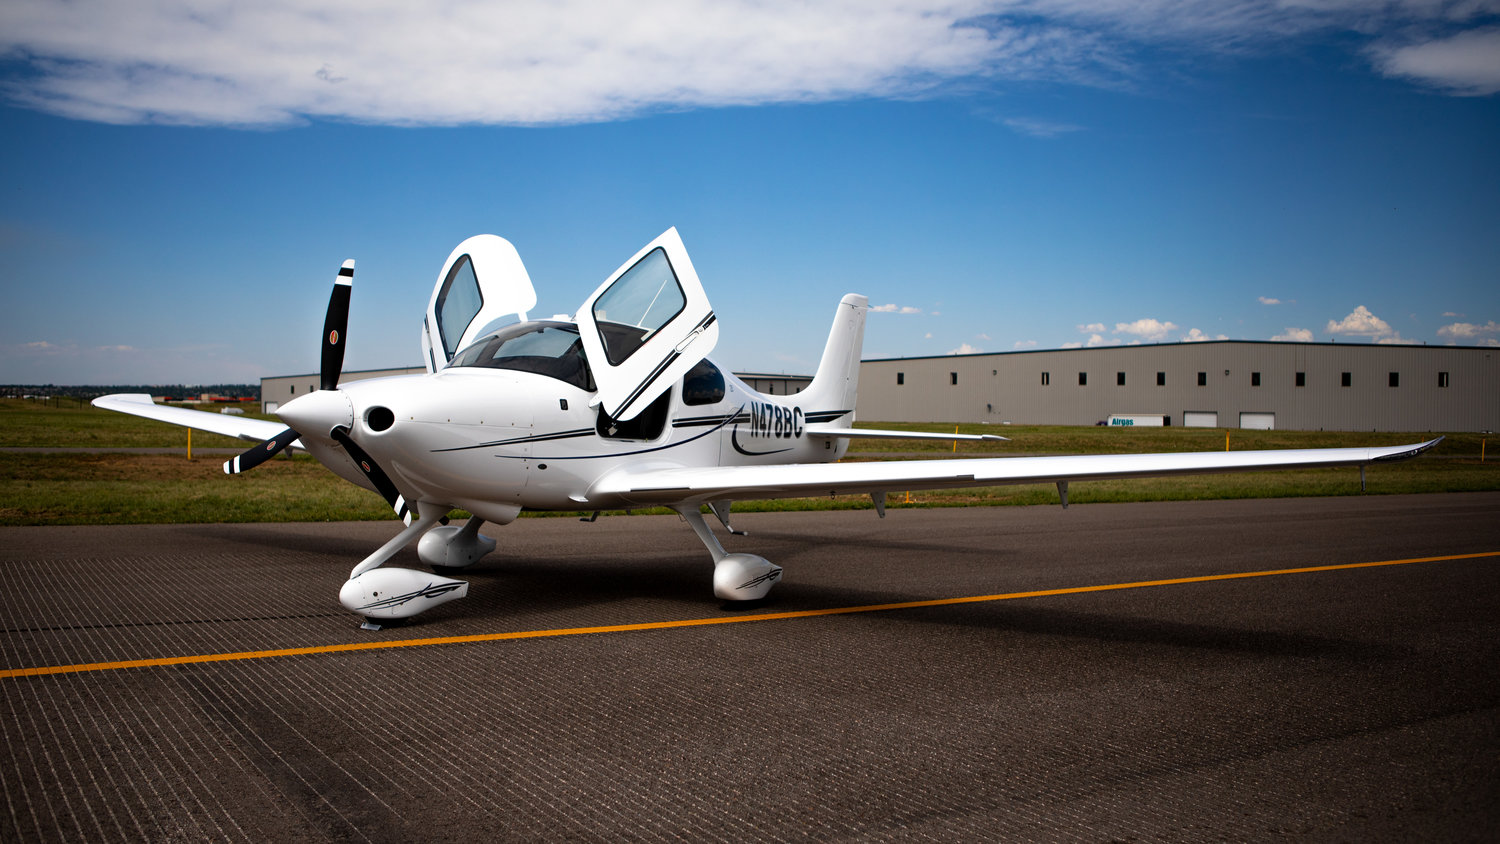 N478BC | 2019 Cirrus SR20 G6 with Air conditioning, auto pilot, and Garmin Perspective+ avionics